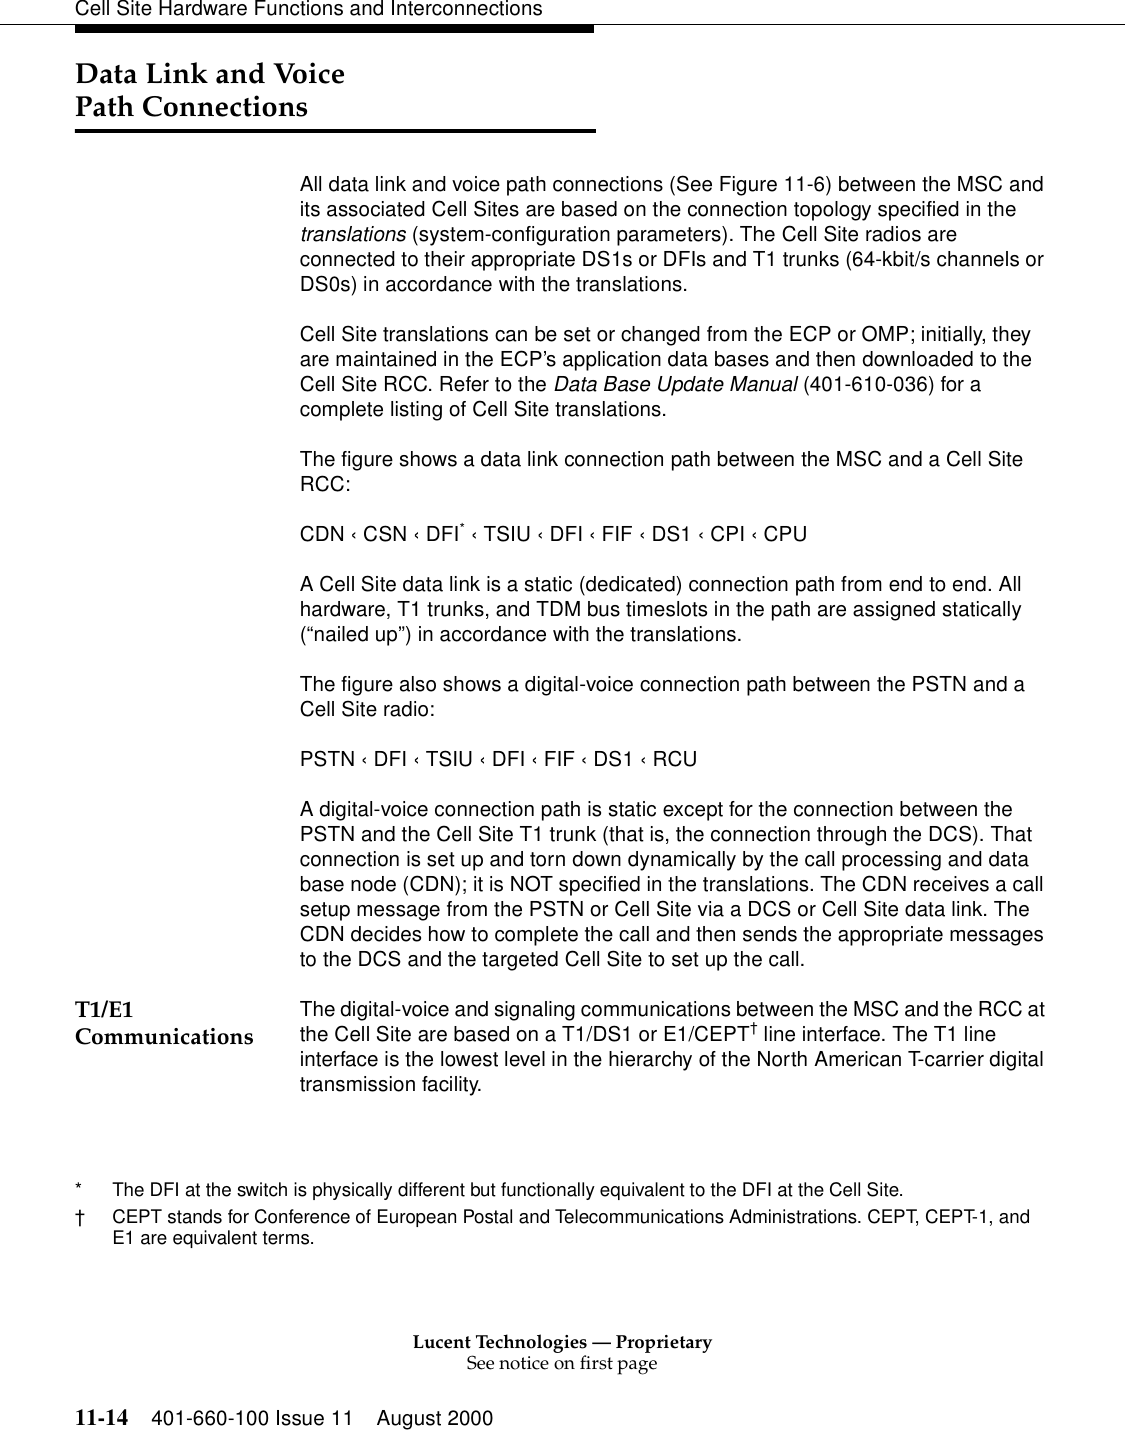 Lucent Technologies — ProprietarySee notice on first page11-14 401-660-100 Issue 11 August 2000Cell Site Hardware Functions and InterconnectionsData Link and VoicePath ConnectionsAll data link and voice path connections (See Figure 11-6) between the MSC and its associated Cell Sites are based on the connection topology specified in the translations (system-configuration parameters). The Cell Site radios are connected to their appropriate DS1s or DFIs and T1 trunks (64-kbit/s channels or DS0s) in accordance with the translations.Cell Site translations can be set or changed from the ECP or OMP; initially, they are maintained in the ECP’s application data bases and then downloaded to the Cell Site RCC. Refer to the Data Base Update Manual (401-610-036) for a complete listing of Cell Site translations.The figure shows a data link connection path between the MSC and a Cell Site RCC:CDN ‹ CSN ‹ DFI* ‹ TSIU ‹ DFI ‹ FIF ‹ DS1 ‹ CPI ‹ CPUA Cell Site data link is a static (dedicated) connection path from end to end. All hardware, T1 trunks, and TDM bus timeslots in the path are assigned statically (“nailed up”) in accordance with the translations.The figure also shows a digital-voice connection path between the PSTN and a Cell Site radio:PSTN ‹ DFI ‹ TSIU ‹ DFI ‹ FIF ‹ DS1 ‹ RCUA digital-voice connection path is static except for the connection between the PSTN and the Cell Site T1 trunk (that is, the connection through the DCS). That connection is set up and torn down dynamically by the call processing and data base node (CDN); it is NOT specified in the translations. The CDN receives a call setup message from the PSTN or Cell Site via a DCS or Cell Site data link. The CDN decides how to complete the call and then sends the appropriate messages to the DCS and the targeted Cell Site to set up the call.T1/E1 Communications The digital-voice and signaling communications between the MSC and the RCC at the Cell Site are based on a T1/DS1 or E1/CEPT† line interface. The T1 line interface is the lowest level in the hierarchy of the North American T-carrier digital transmission facility.* The DFI at the switch is physically different but functionally equivalent to the DFI at the Cell Site.†CEPT stands for Conference of European Postal and Telecommunications Administrations. CEPT, CEPT-1, and E1 are equivalent terms.